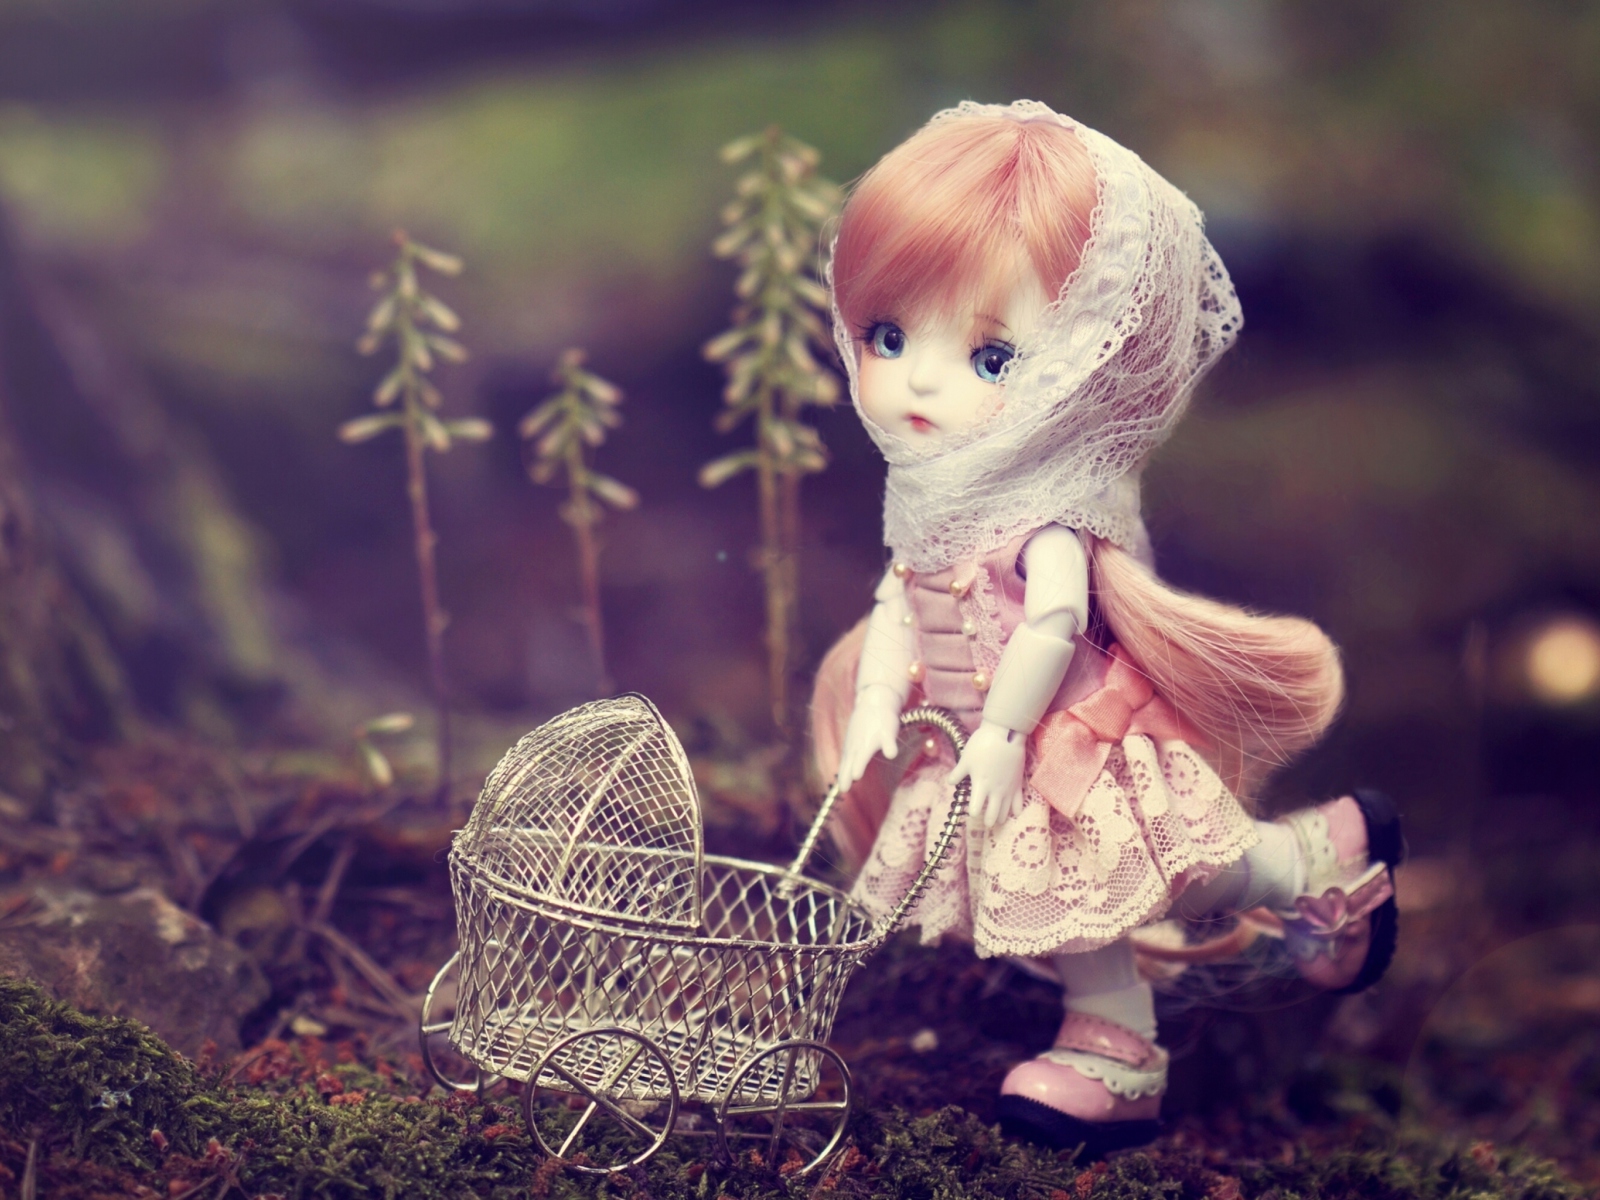 Das Doll With Baby Carriage Wallpaper 1600x1200